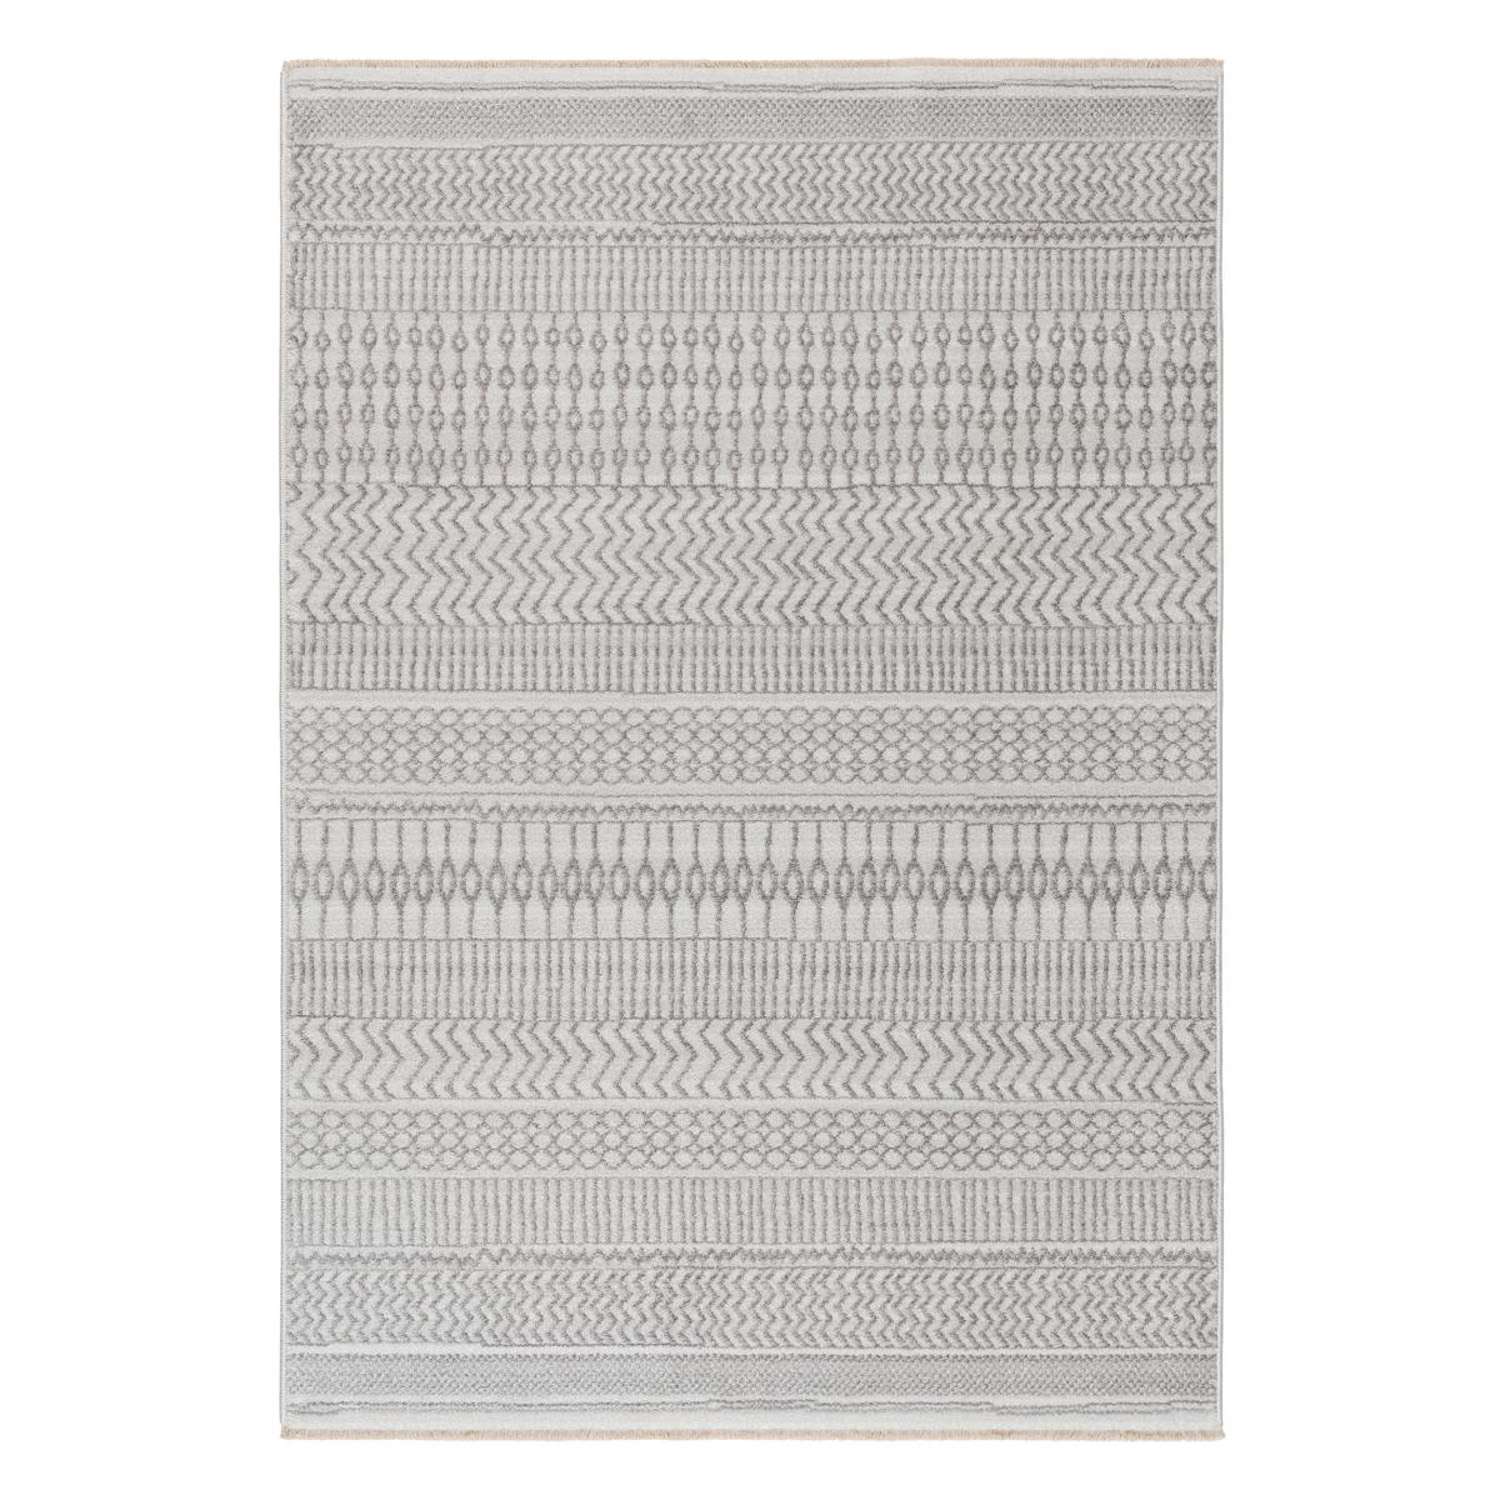 Low-Pile Rug - Augusto - rectangle